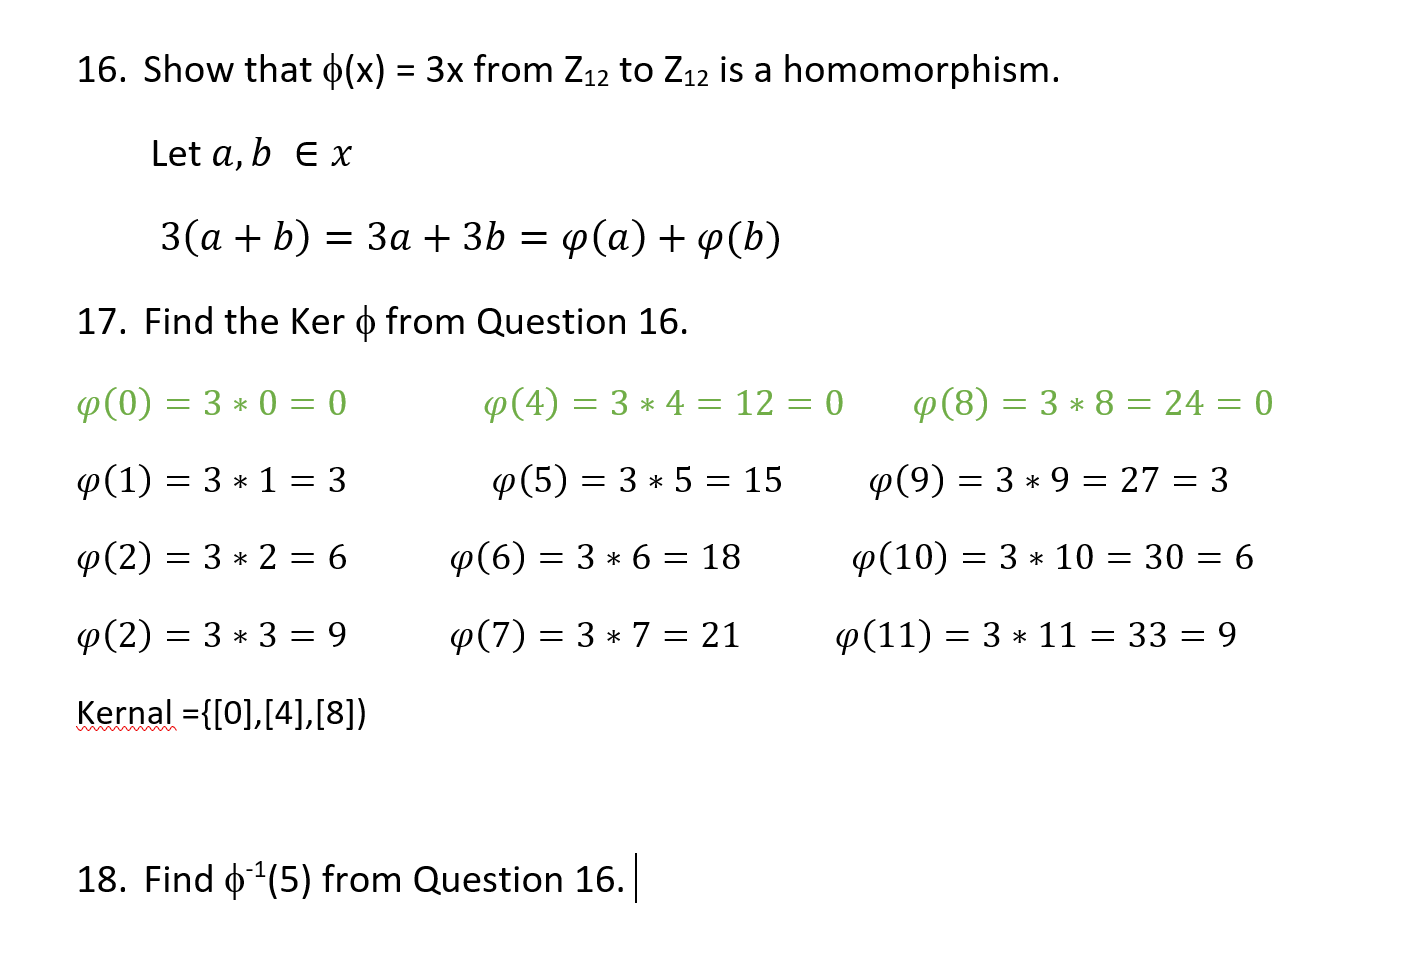 16. Show that o(x) = 3x from Z12 to Z12 is a homomorphism.
Let a, b E x
3(a + b) = 3a + 3b = p(a) + p(b)
17. Find the Ker o from Question 16.
P(8) = 3 * 8 = 24 = 0
P(0) = 3 * 0 = 0
P(4) = 3 * 4 = 12 = 0
p(1) = 3 * 1 = 3
p(9) = 3 * 9 = 27 = 3
p(5) = 3 * 5 = 15
p(10) = 3 * 10 = 30 = 6
p(2) = 3 * 2 = 6
p(6) = 3 * 6 = 18
p(11) = 3 * 11 = 33 = 9
p(2) = 3 * 3 = 9
p(7) = 3 * 7 = 21
%3D
Kernal ={[0],[4],[8])
18. Find o(5) from Question 16.
